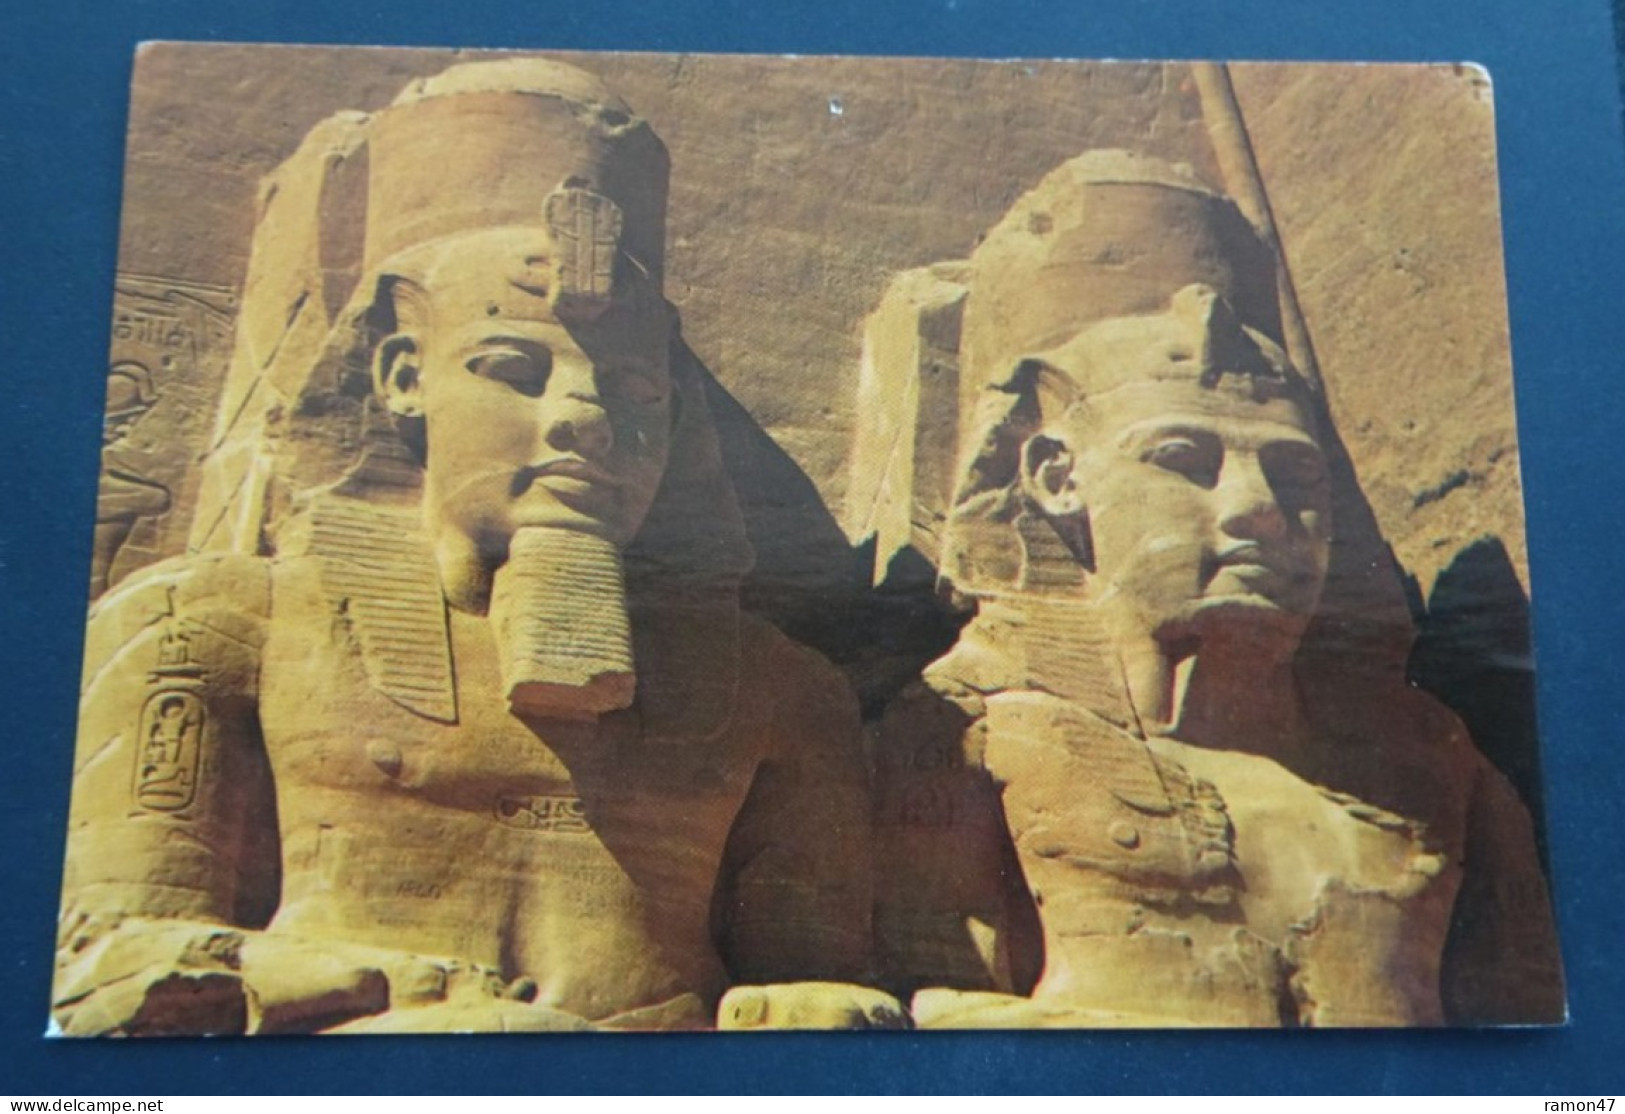 Abou Simbel Rock Temple Of Ramses II - Partial View Of The Gigantic Statues - Tempel Von Abu Simbel